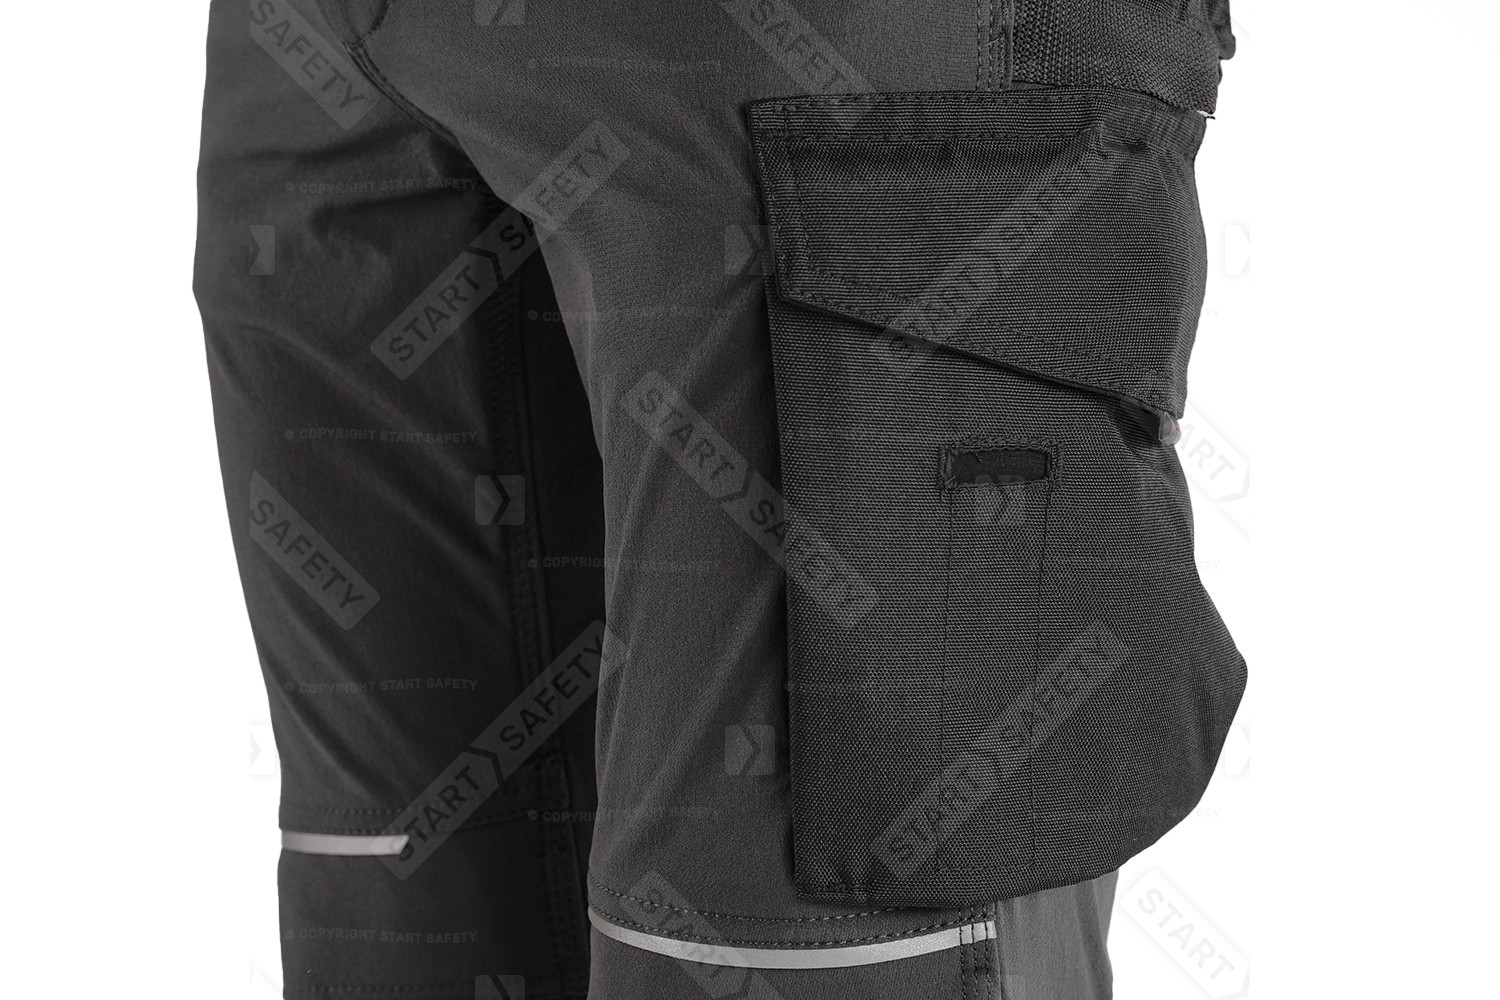 thigh trousers pocket